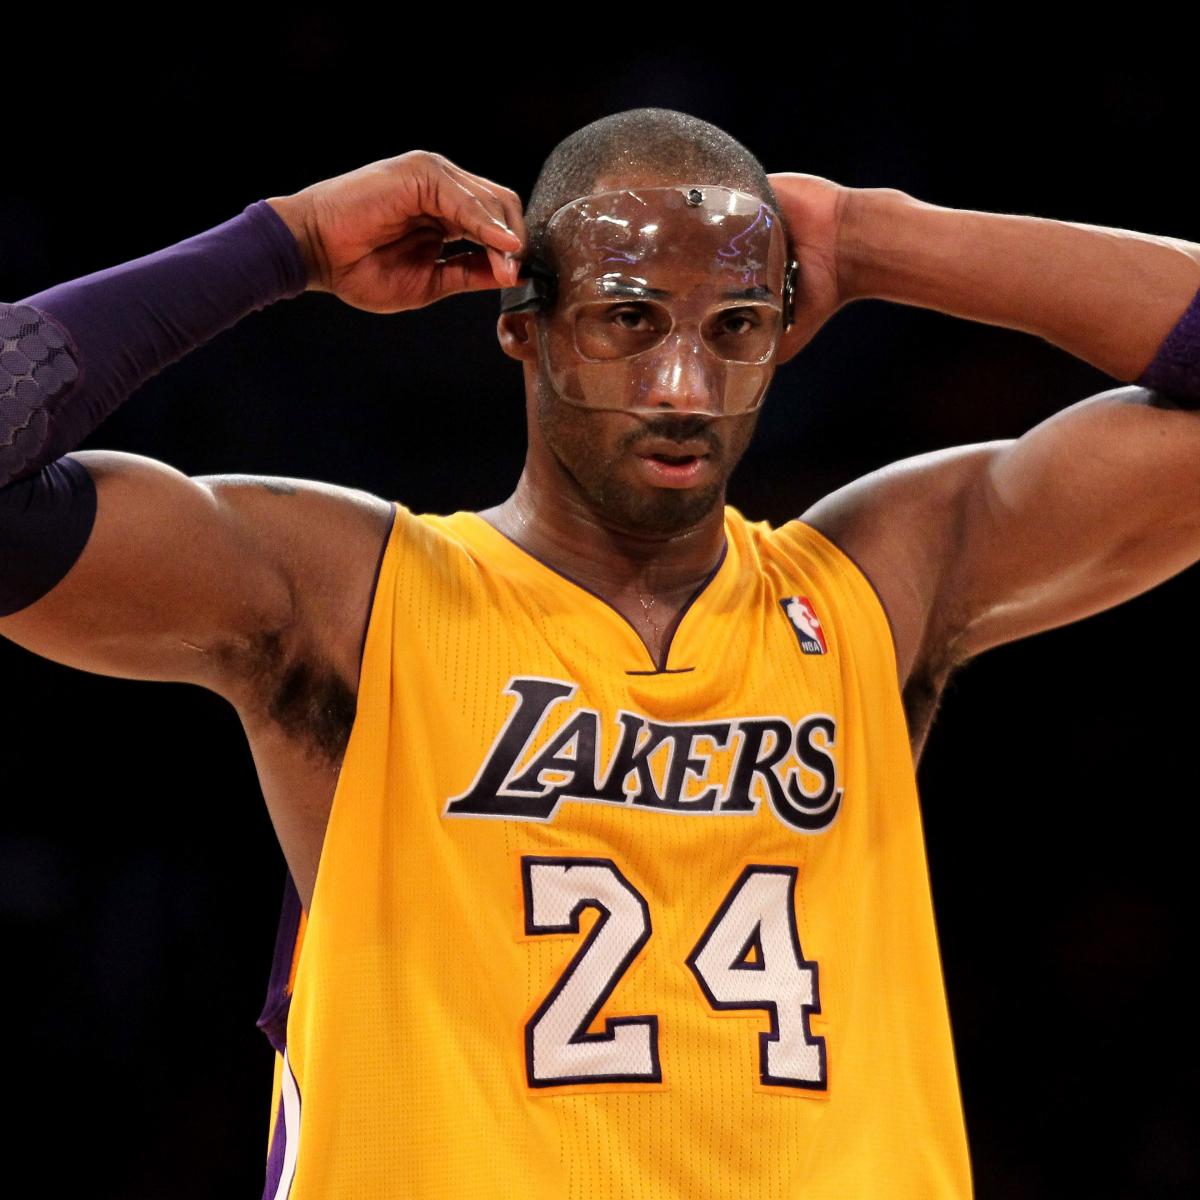 Kobe Bryant Face Mask Expected to Sell for Over $50K